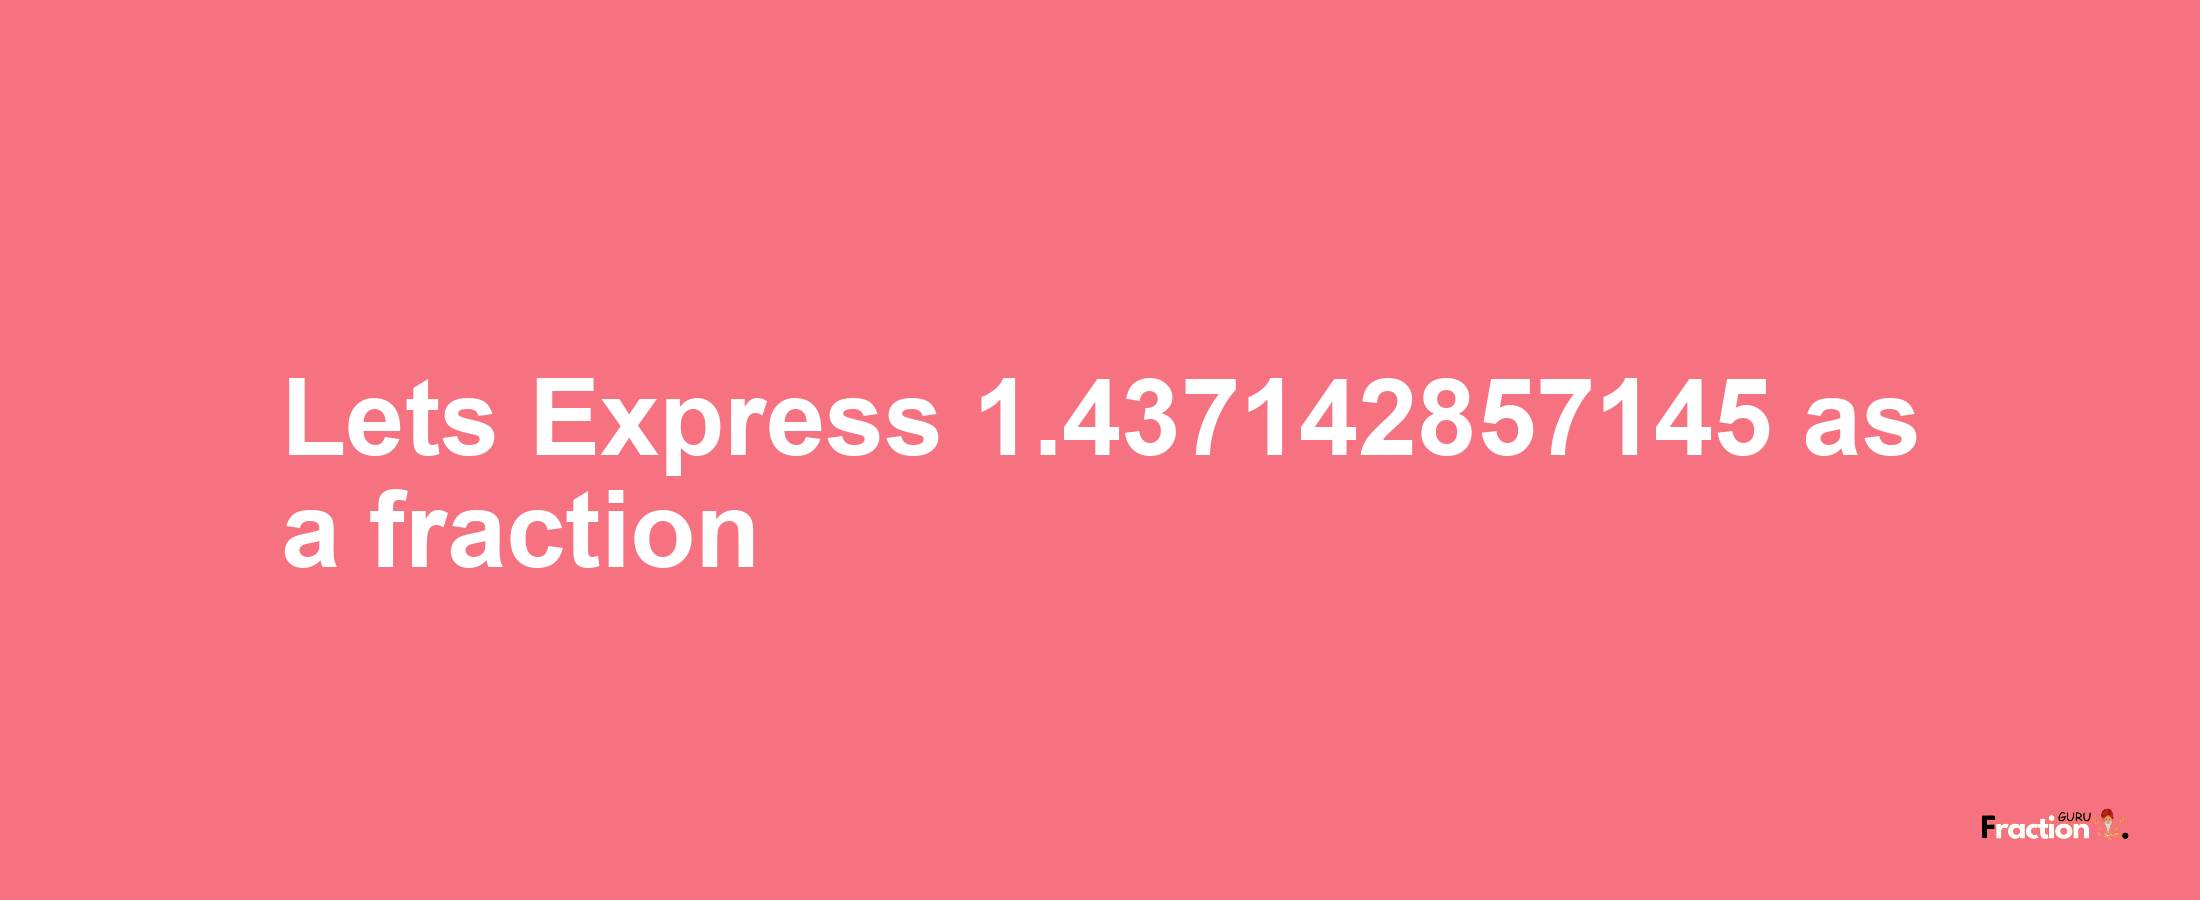 Lets Express 1.437142857145 as afraction